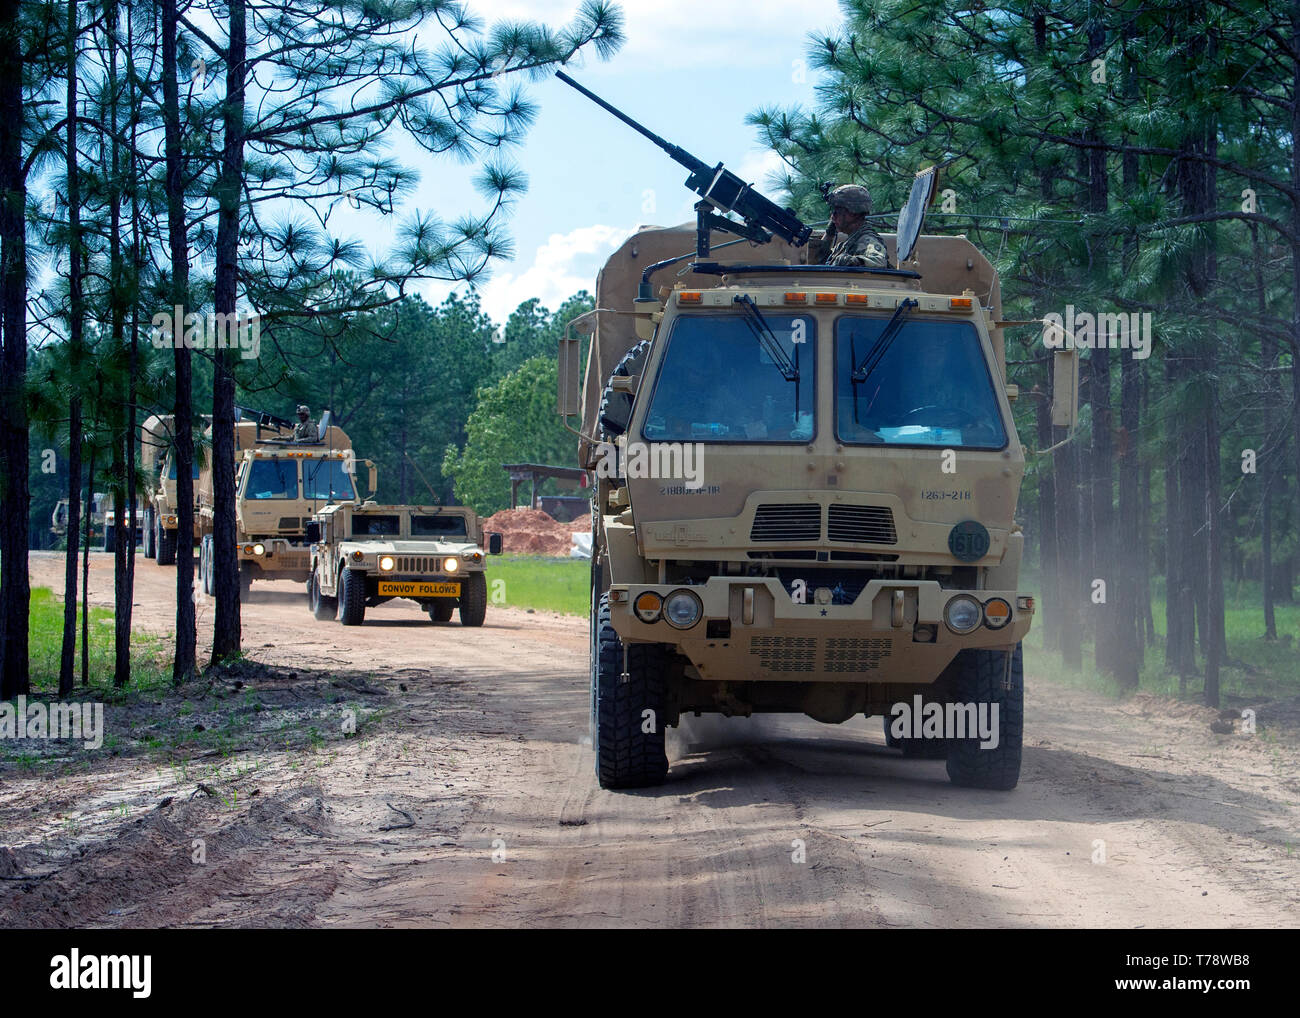 U.S. Army National Guard Soldiers with Hotel Company, 230th Brigade Support Battalion (attached to the 218th Maneuver Enhancement Brigade, South Carolina National Guard), conducted convoy live-fire operations at Fort Stewart, Georgia May 2, 2019 that sharpened their defense and communication skills during annual training in preparation for an upcoming deployment. (U.S. Army National Guard photo by Brian Calhoun, 108th Public Affairs Detachment) Stock Photo